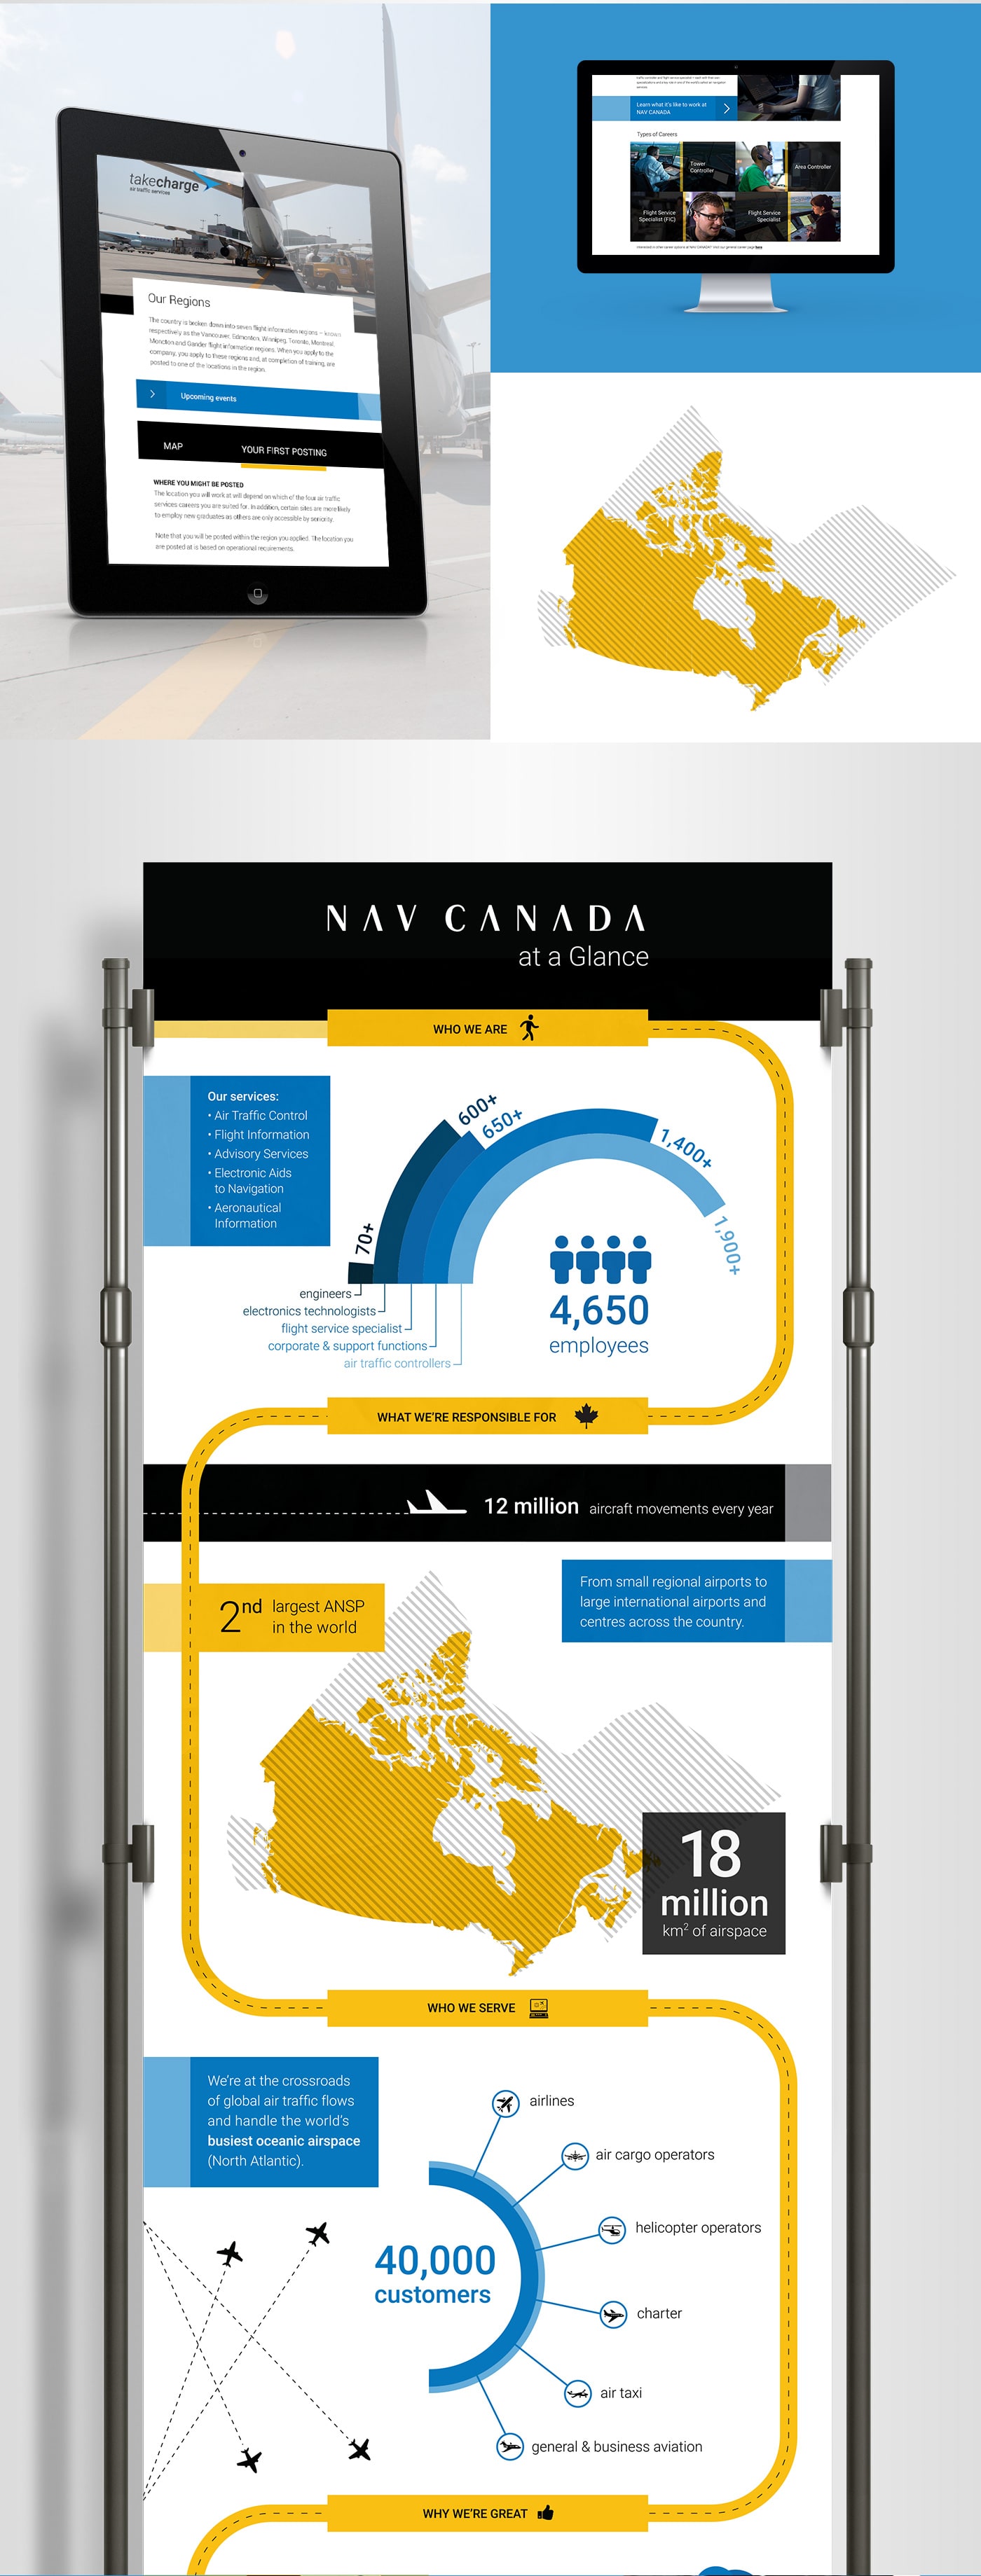 Tablet and desktop view of the NAV CANADA Website and an infographic for the companie's statistic